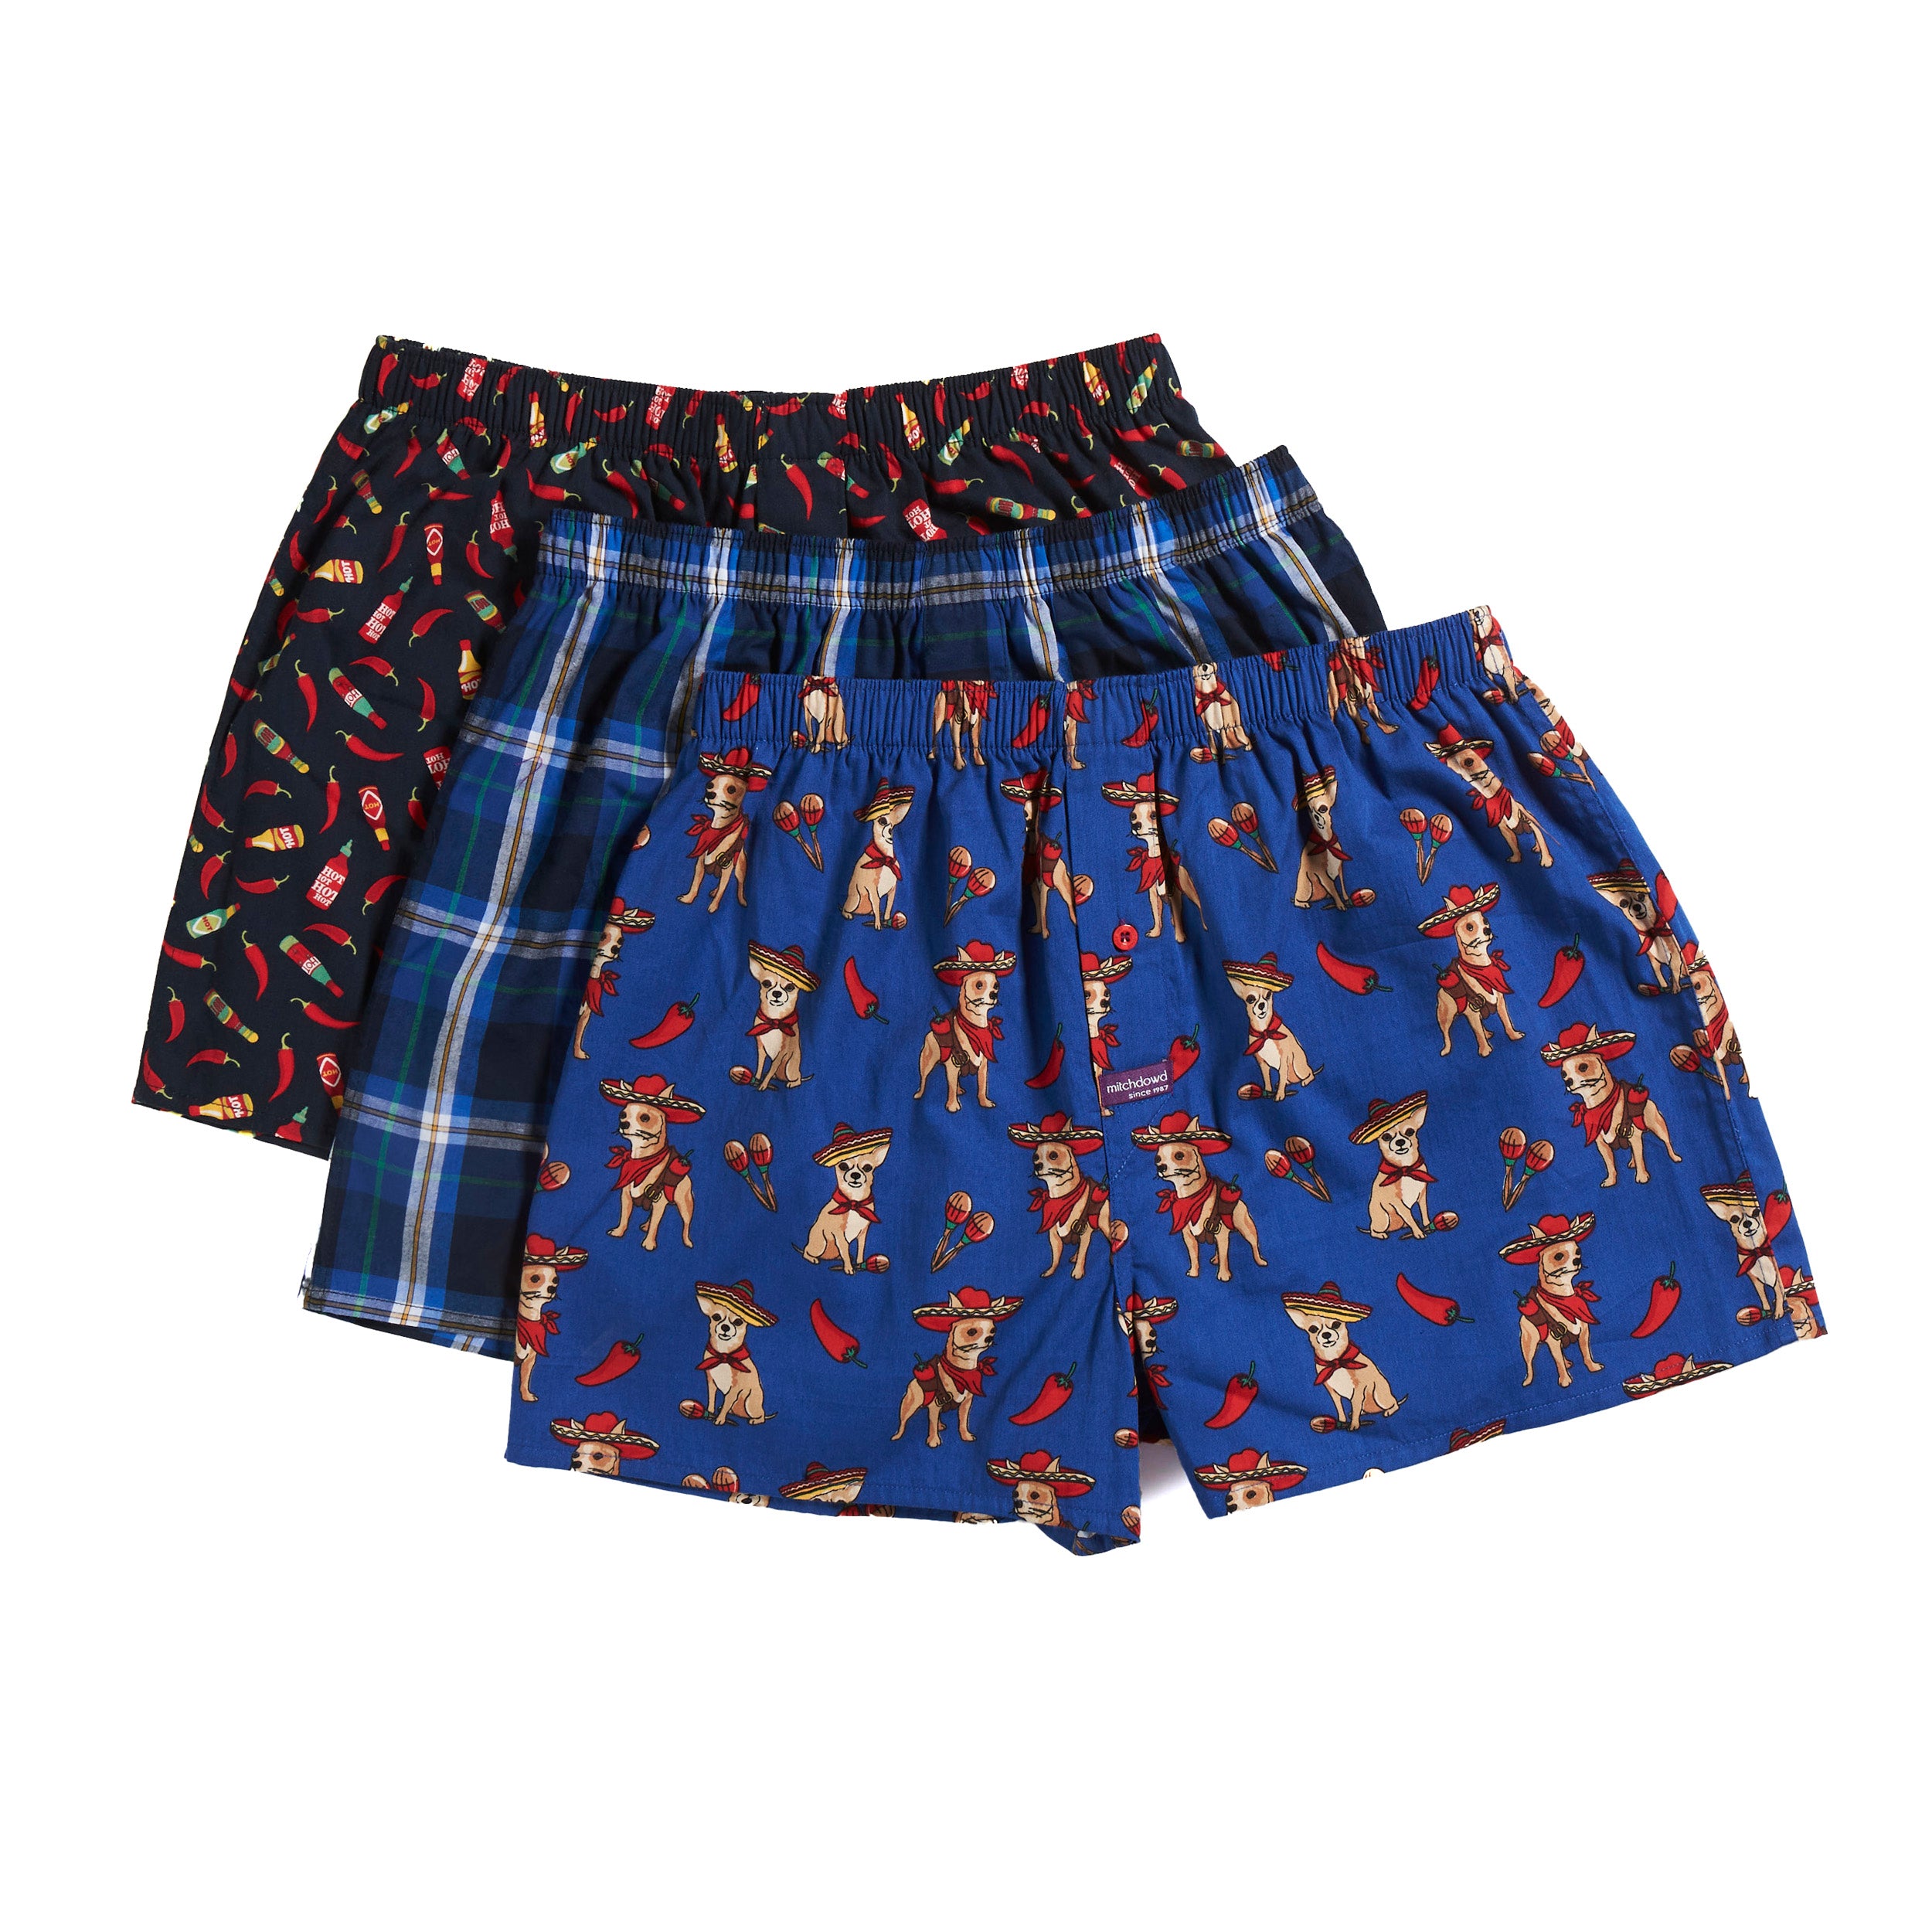 Men's Hot Chihuahua Printed & Yarn Dyed Cotton Boxer Shorts 3 Pack